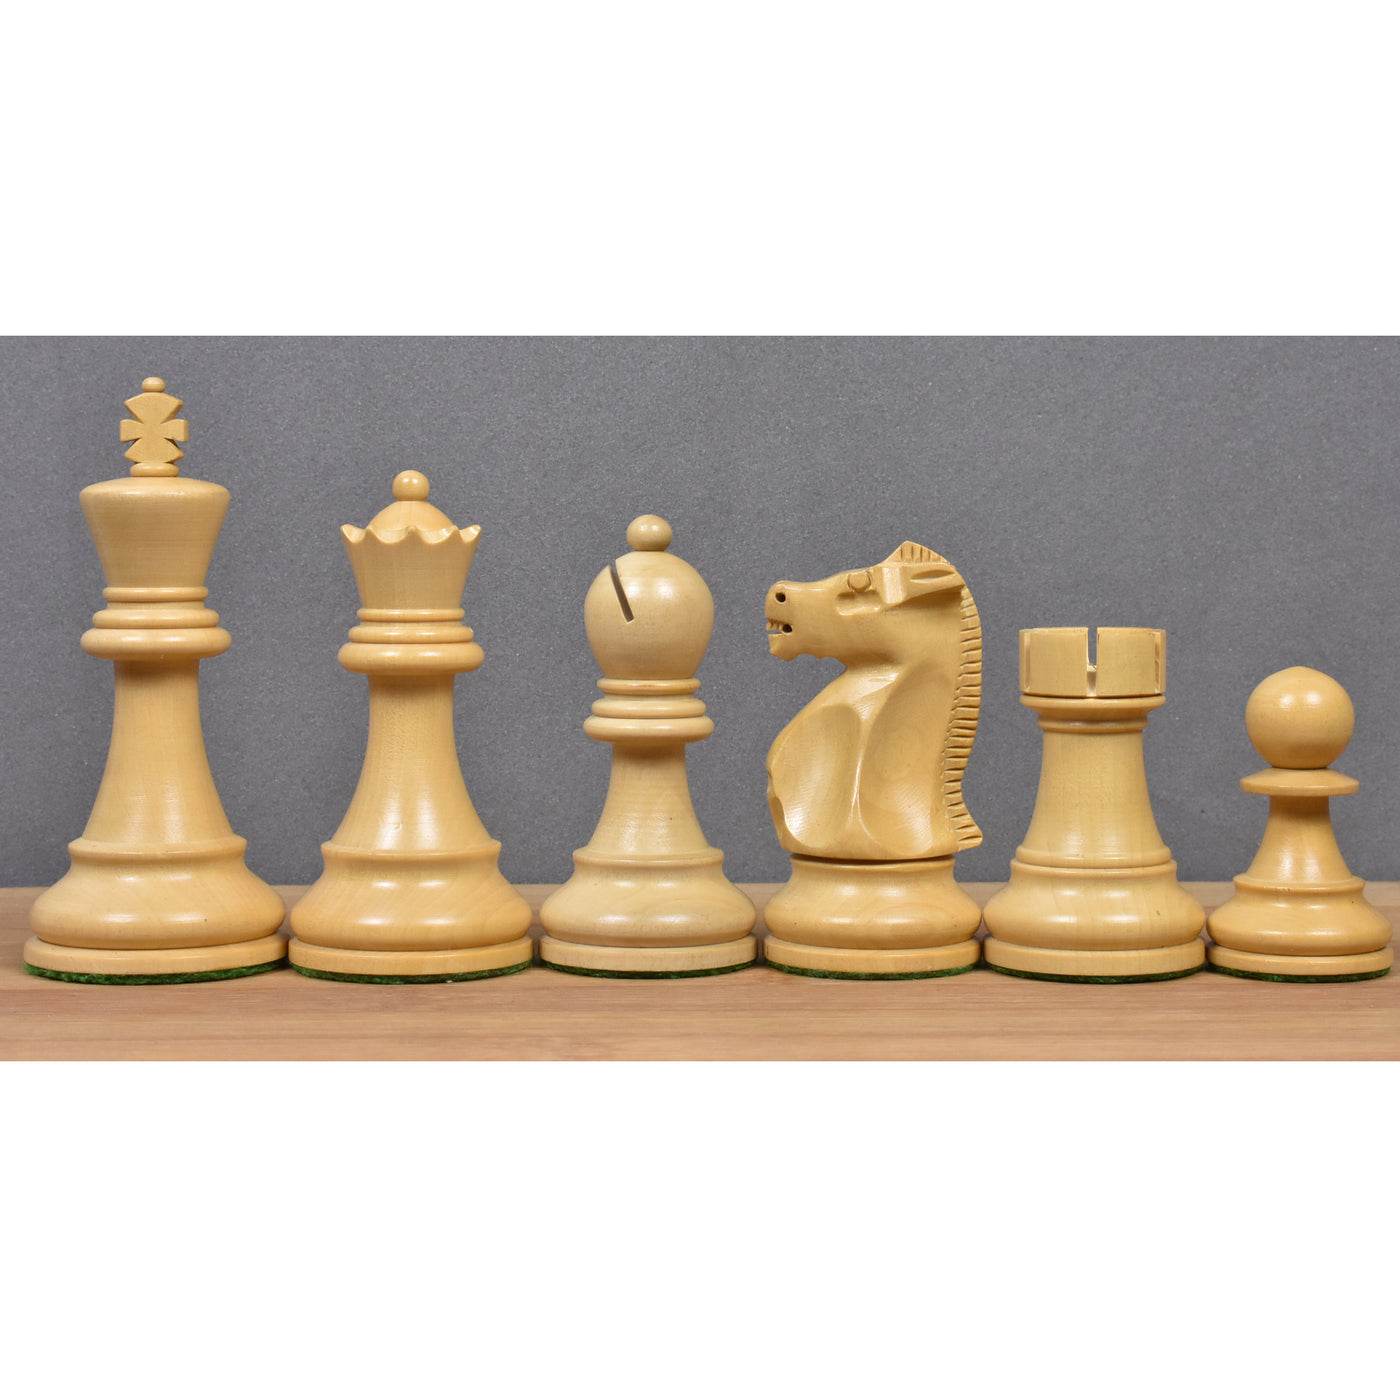 Slightly Imperfect 1972 Championship Fischer Spassky Chess Set - Chess Pieces Only - Double Weighted Ebony wood